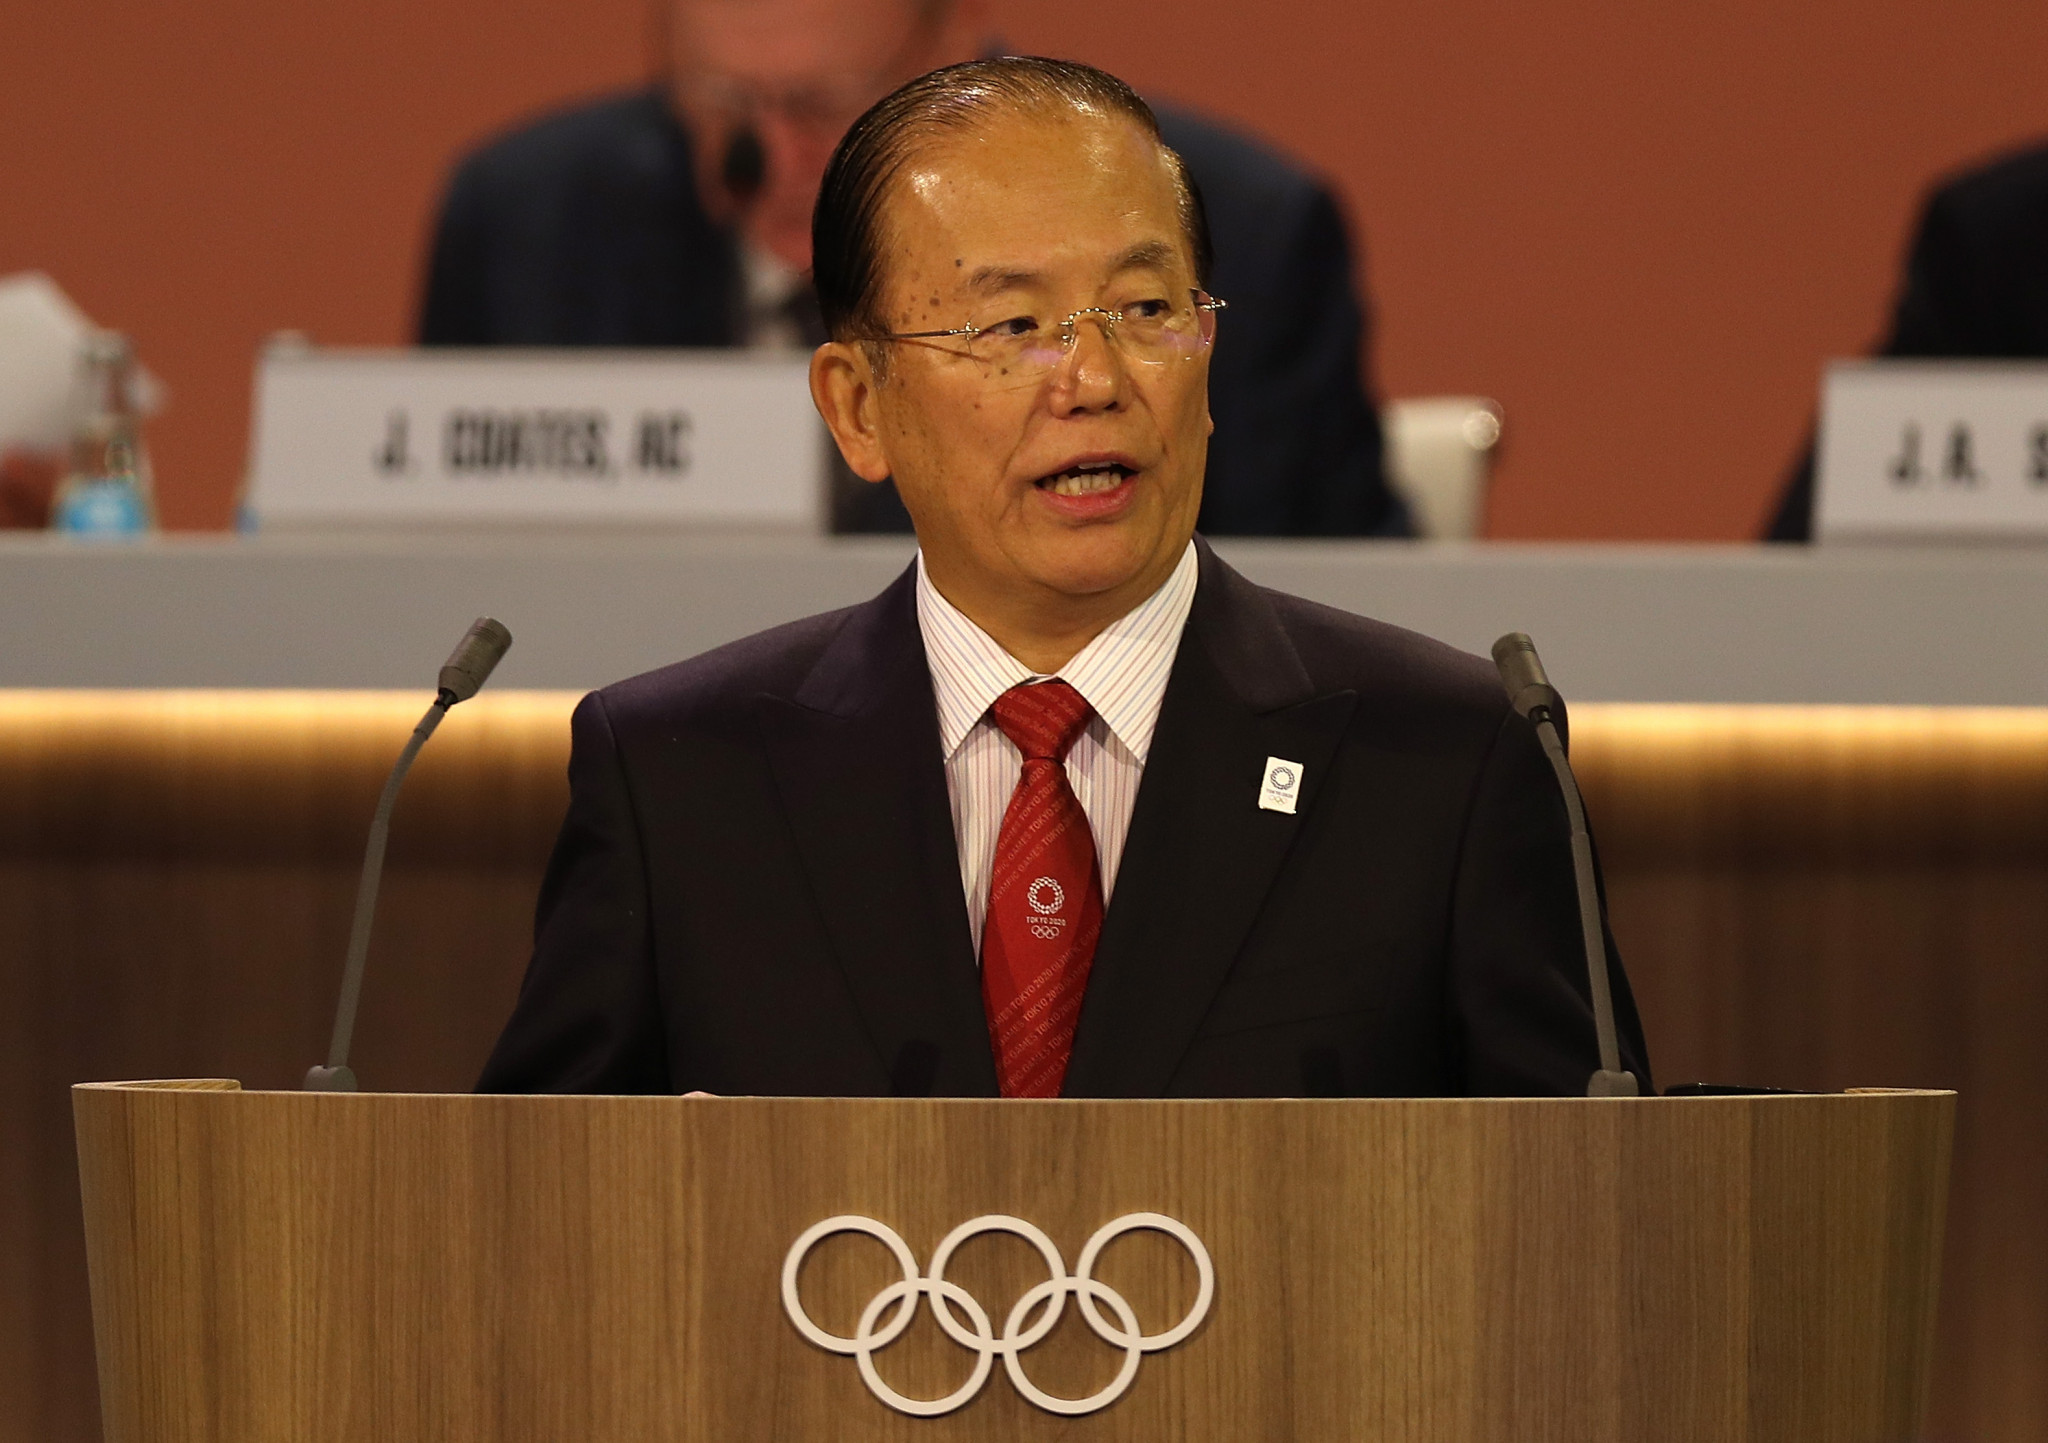 Tokyo 2020 chief executive Toshirō Mutō has warned the cost of rescheduling the Olympics and Paralympics will be 